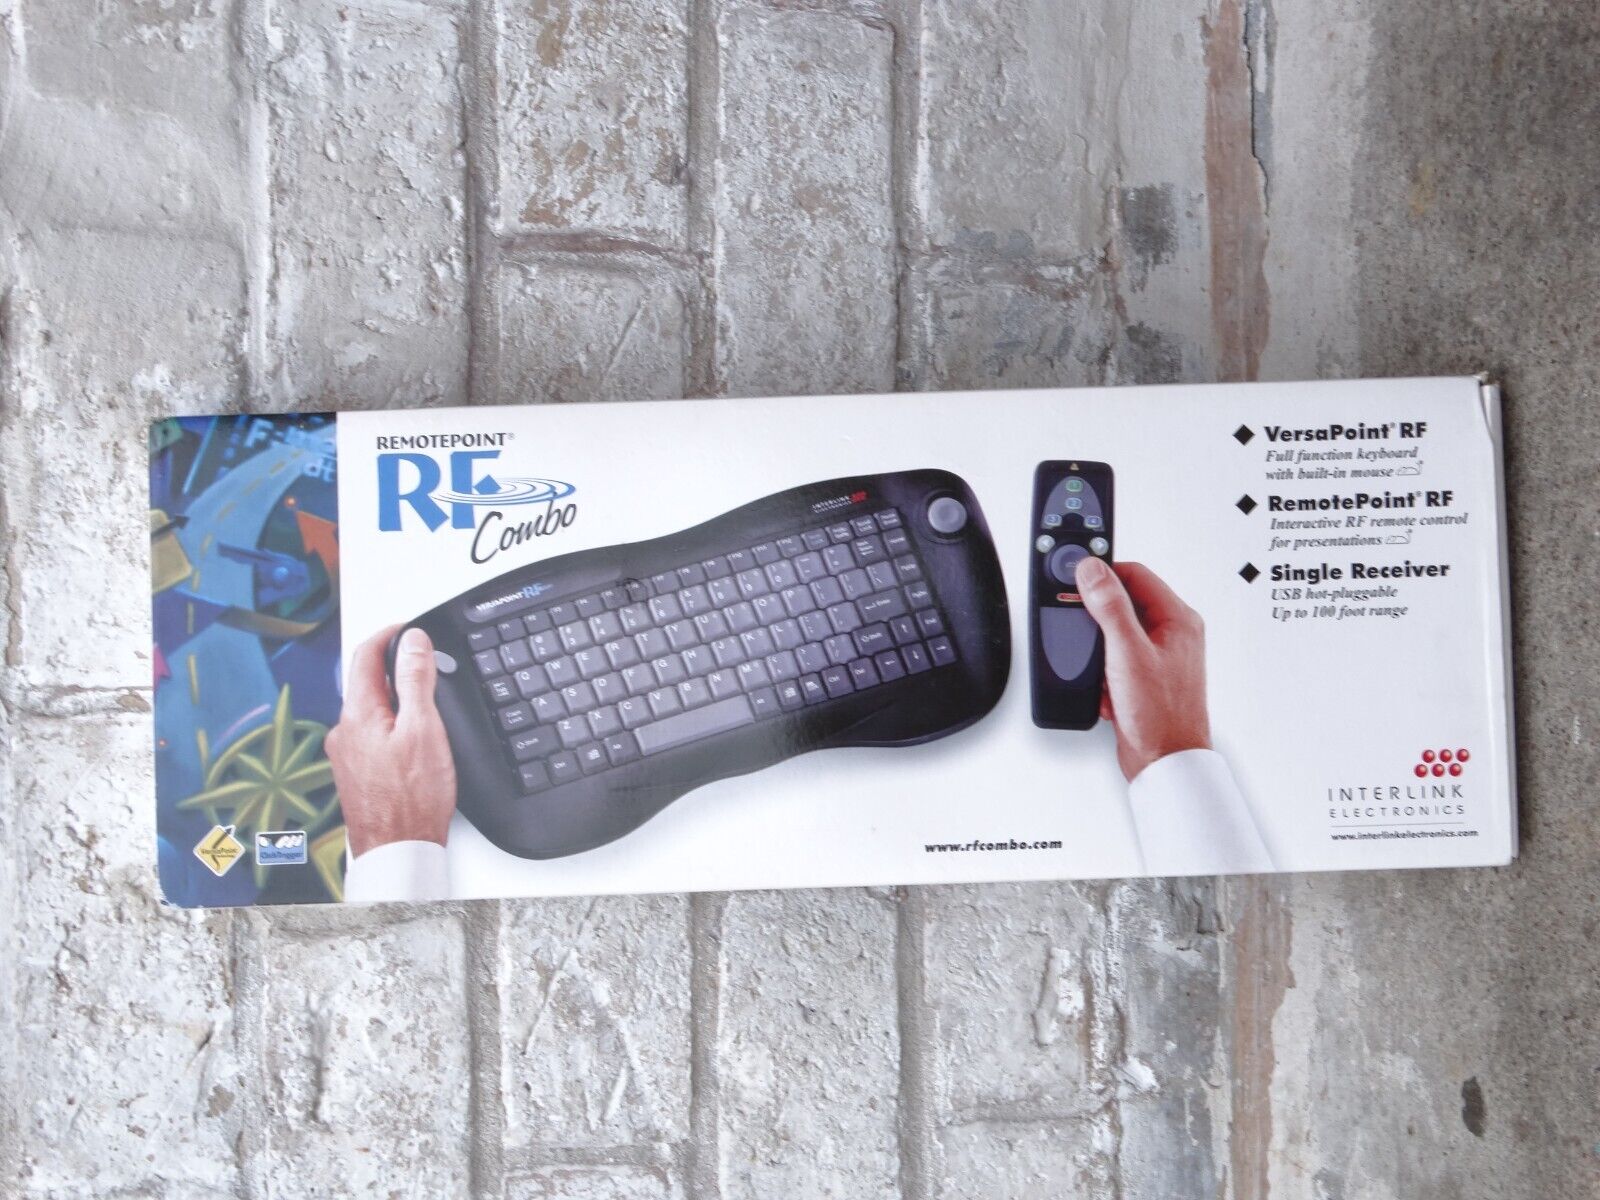 New Sealed Remotepoint RF Combo Keyboard and RF Remote Control VP6241R